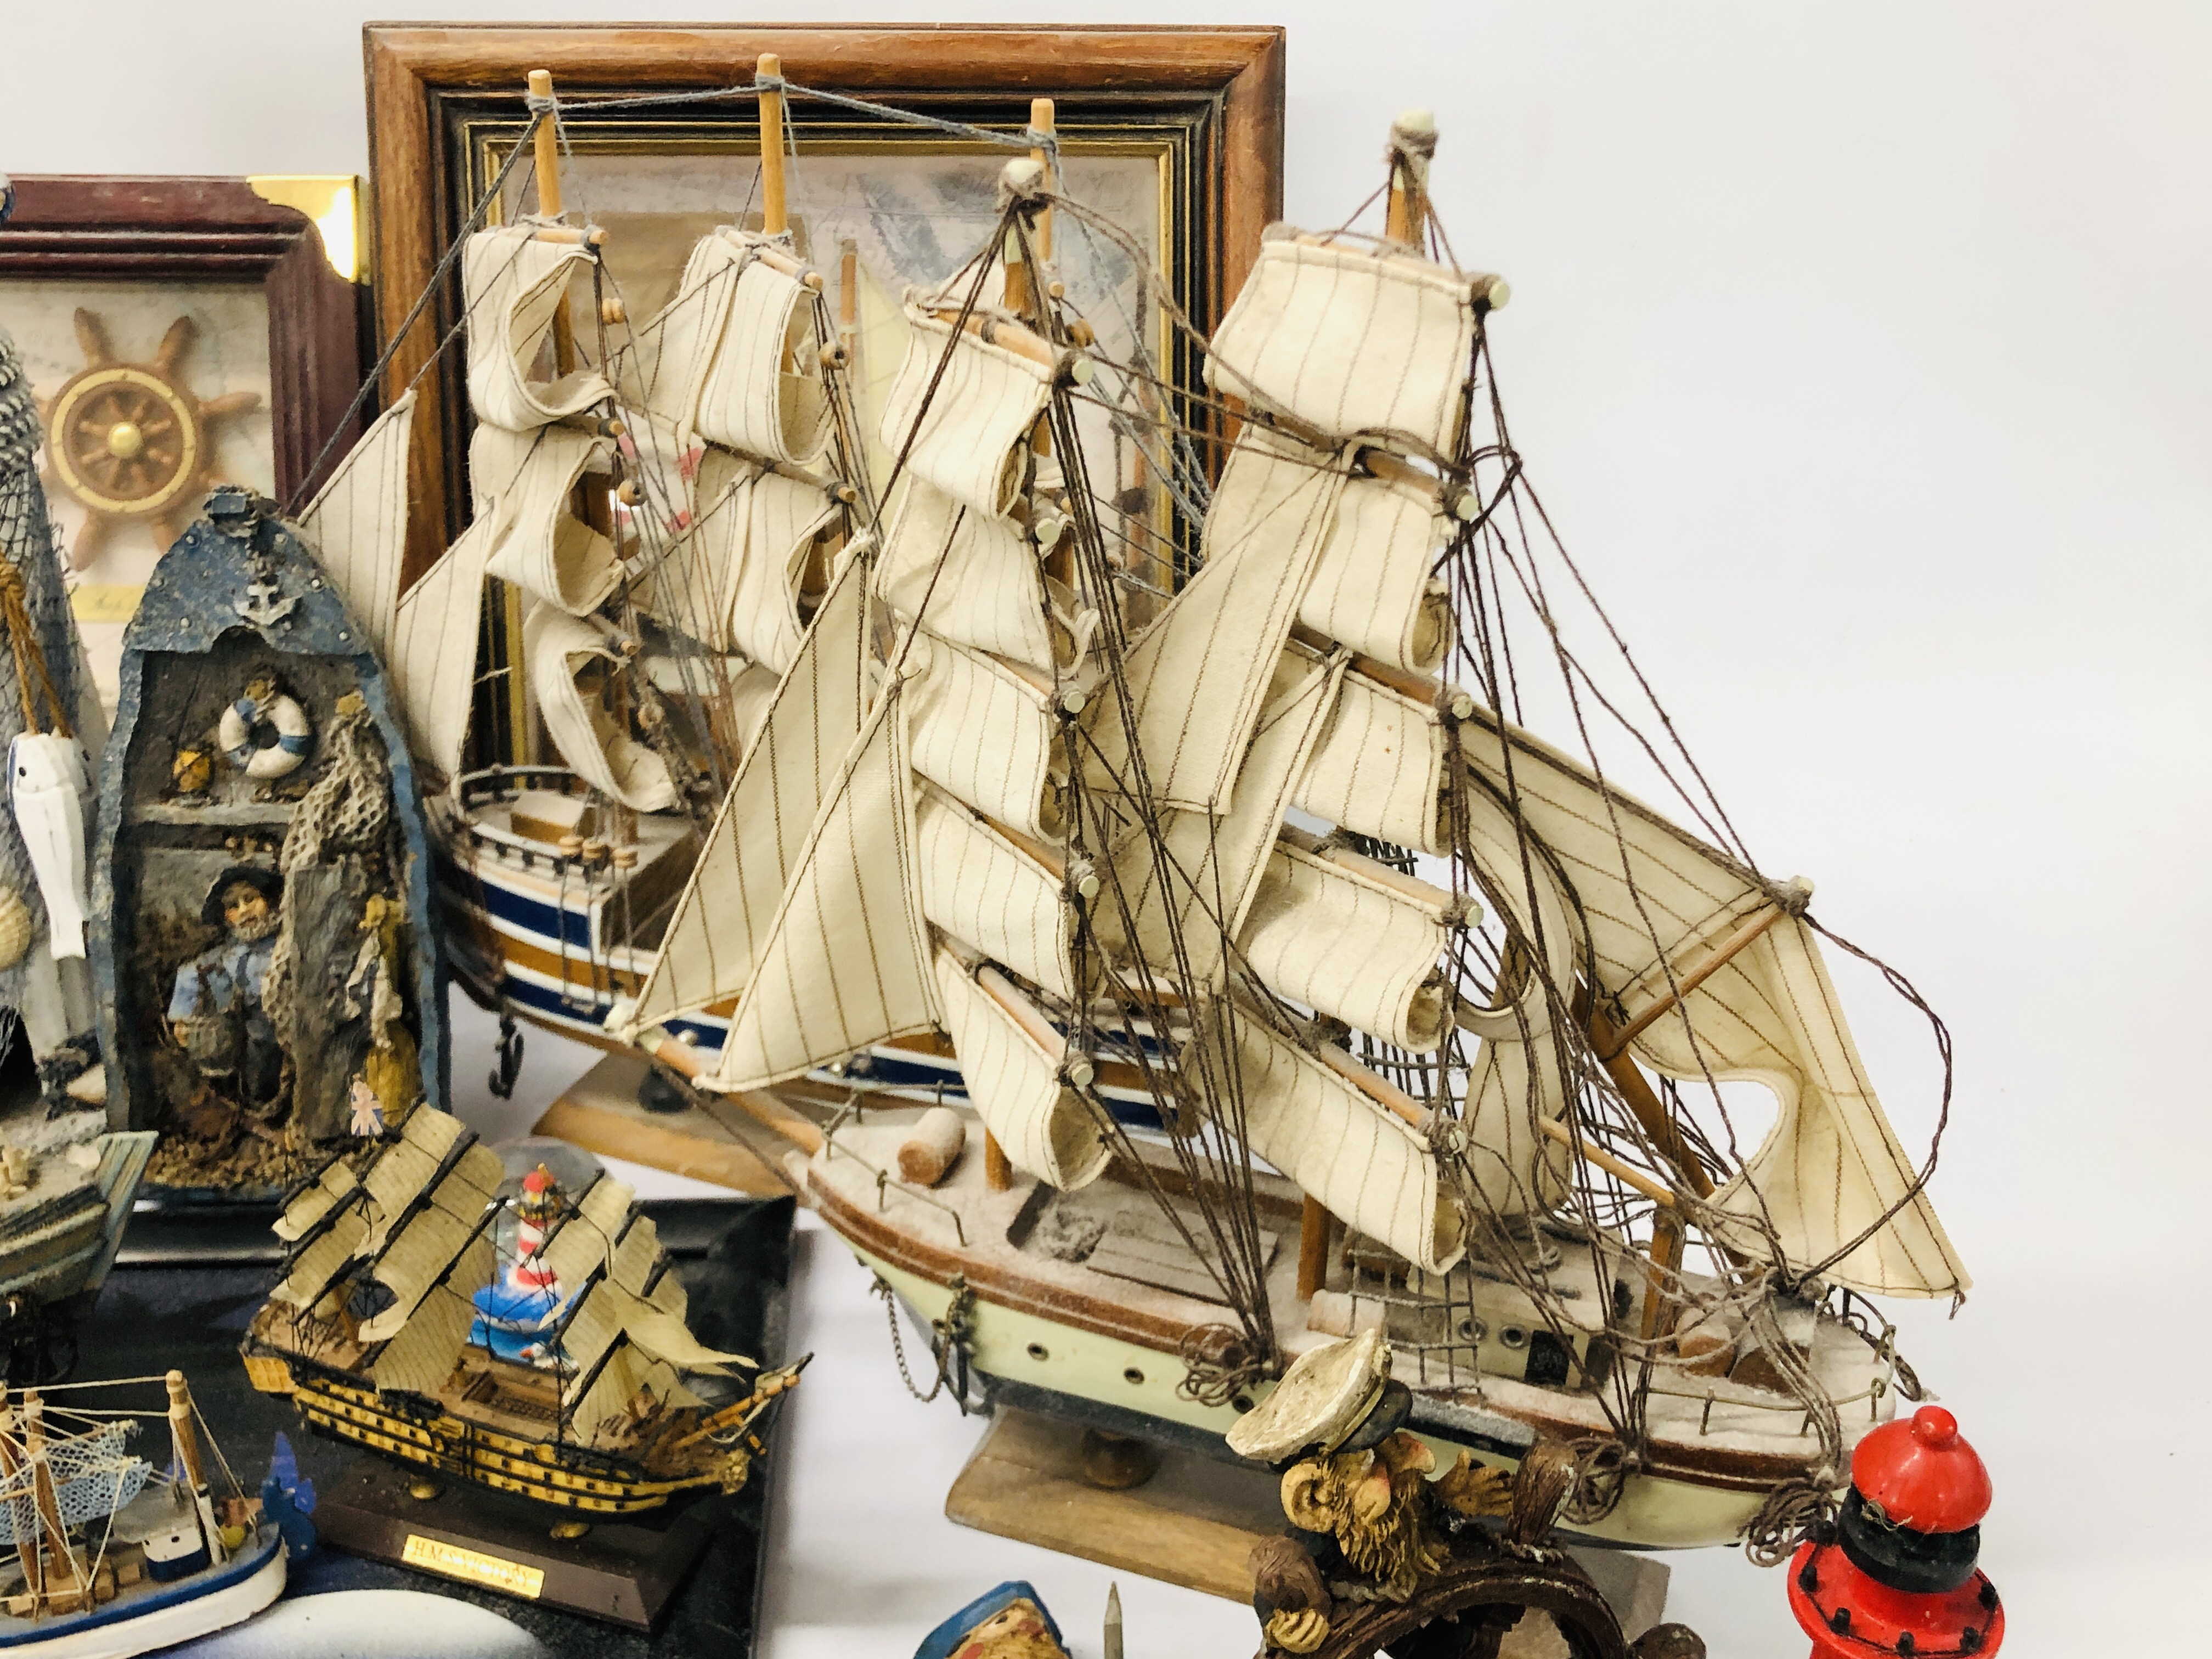 3 NAUTICAL 3D CASED DISPLAYS AND OTHER NAUTICAL ITEMS TO INCLUDE SAILING SHIPS, LIGHTHOUSES ETC. - Image 3 of 11